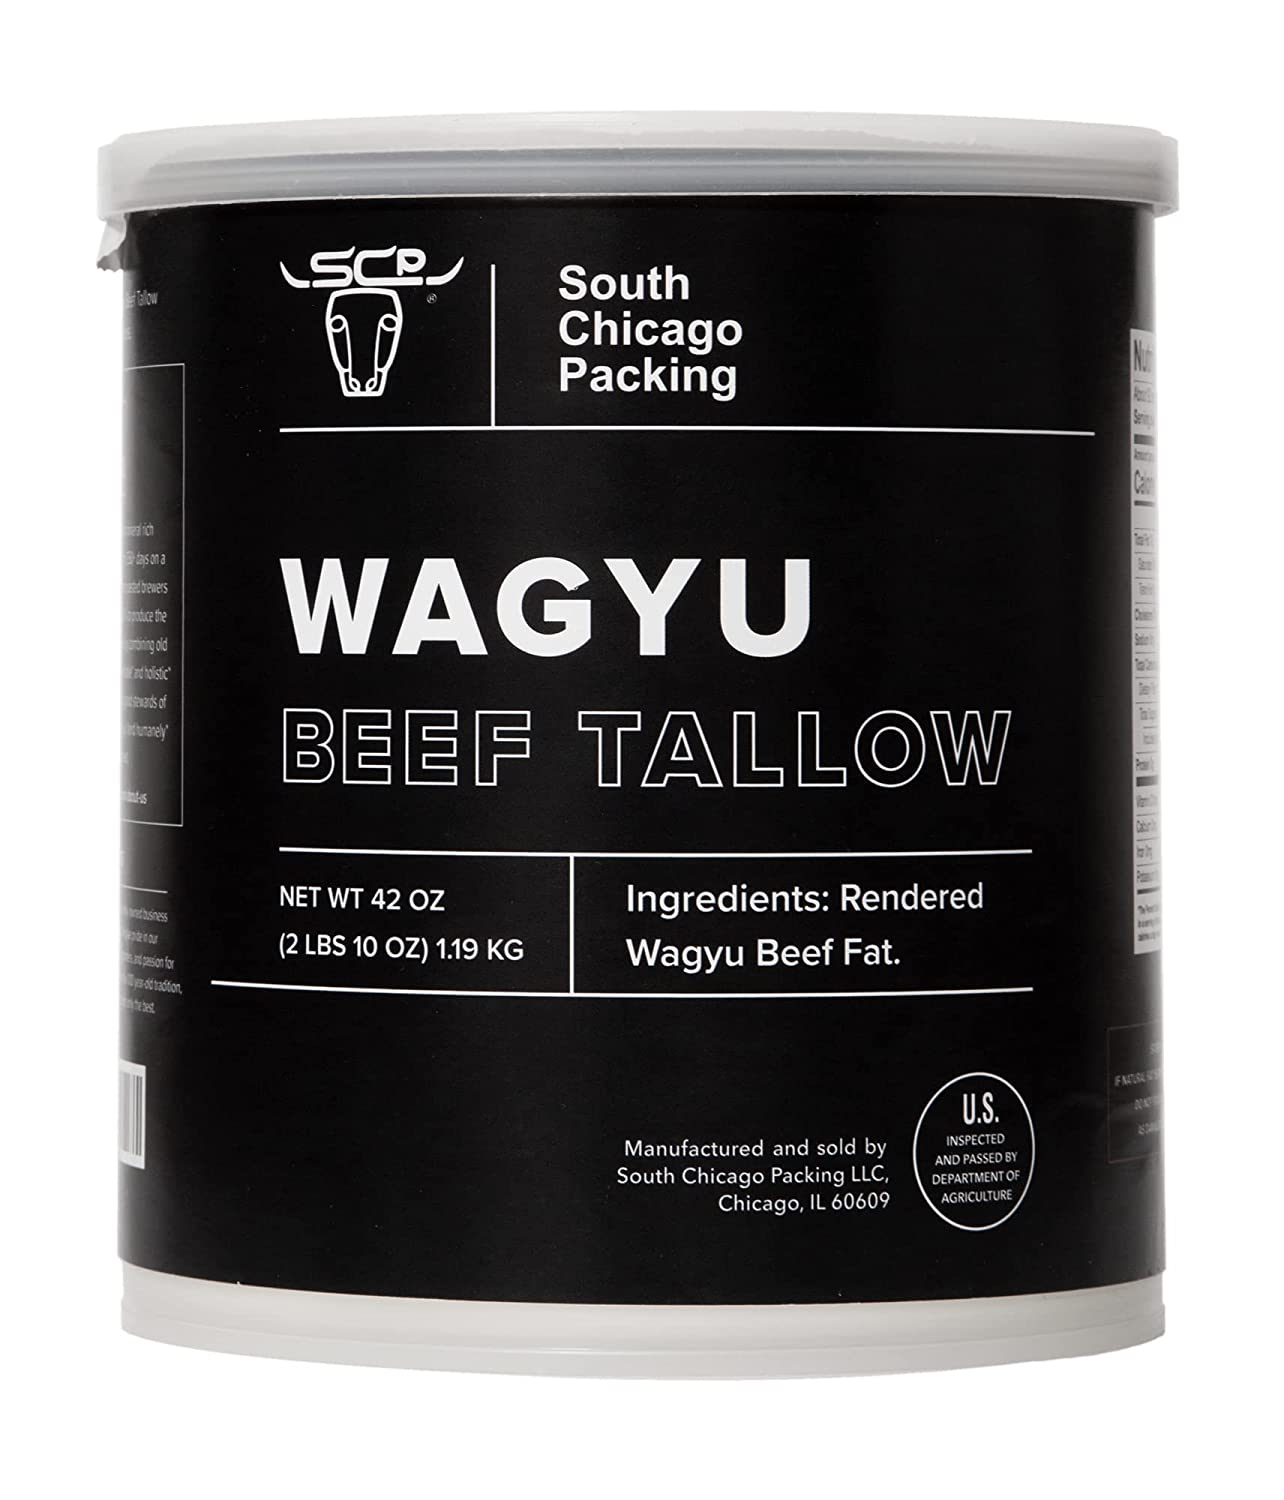 South Chicago Packing Wagyu Beef Tallow, 42 Ounces, Paleo-Friendly, Keto-Friendly, 100% Pure Wagyu